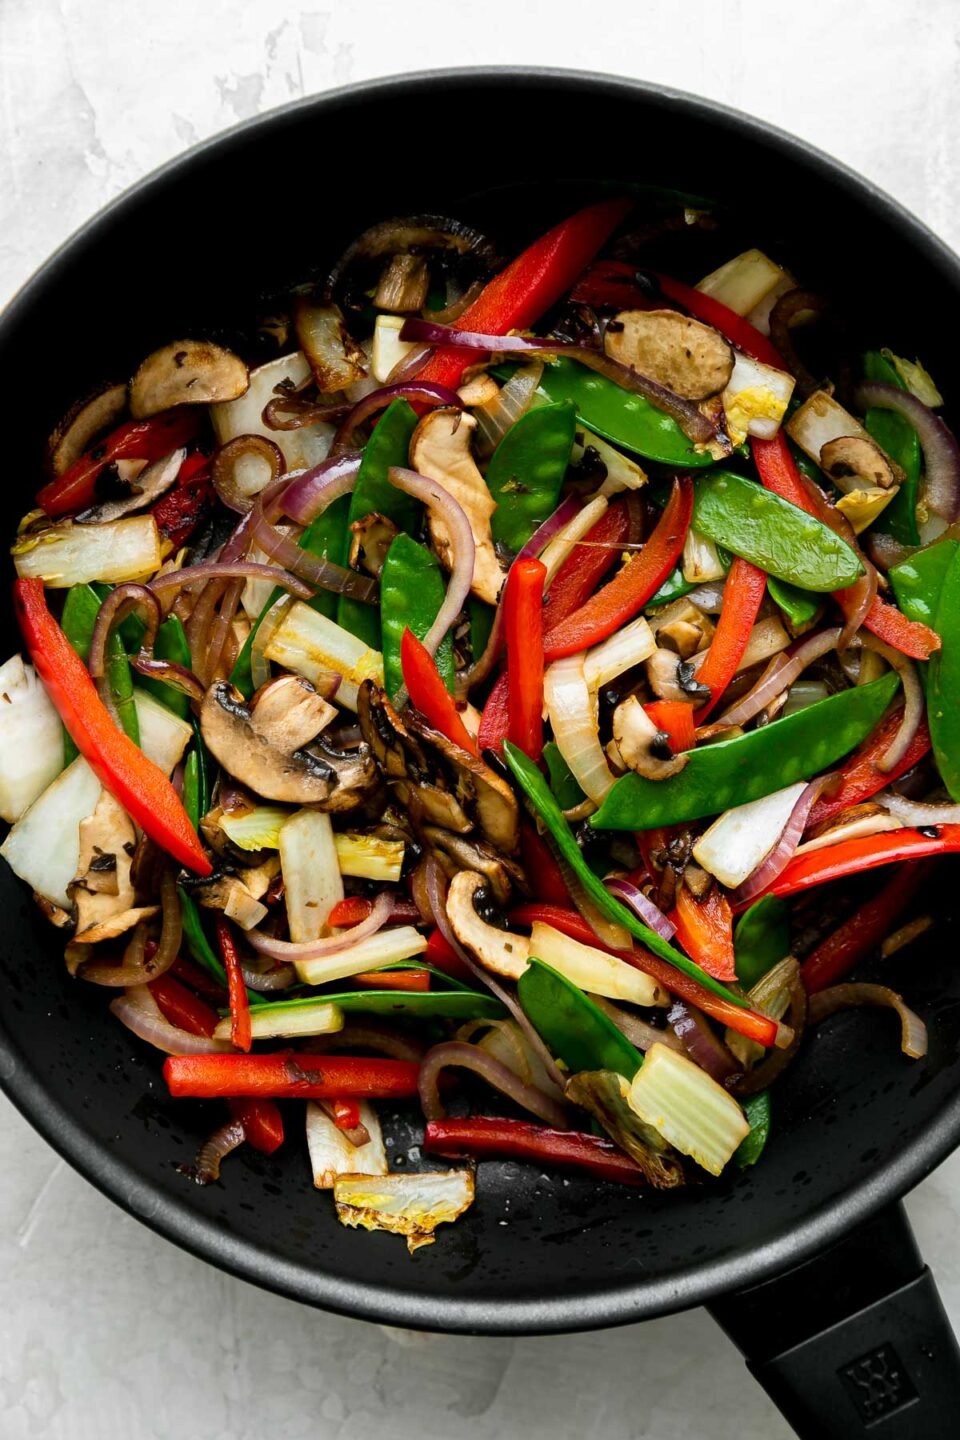 How to make beef and vegetable stir fry, step 3: Stir fry the vegetables. Another batch of stir fry veggies including red onion, red bell pepper, mushrooms, napa cabbage, and snow peas cook in oil in a Zwilling Madura Nonstick Skillet. The skillet sits atop a creamy white textured surface.